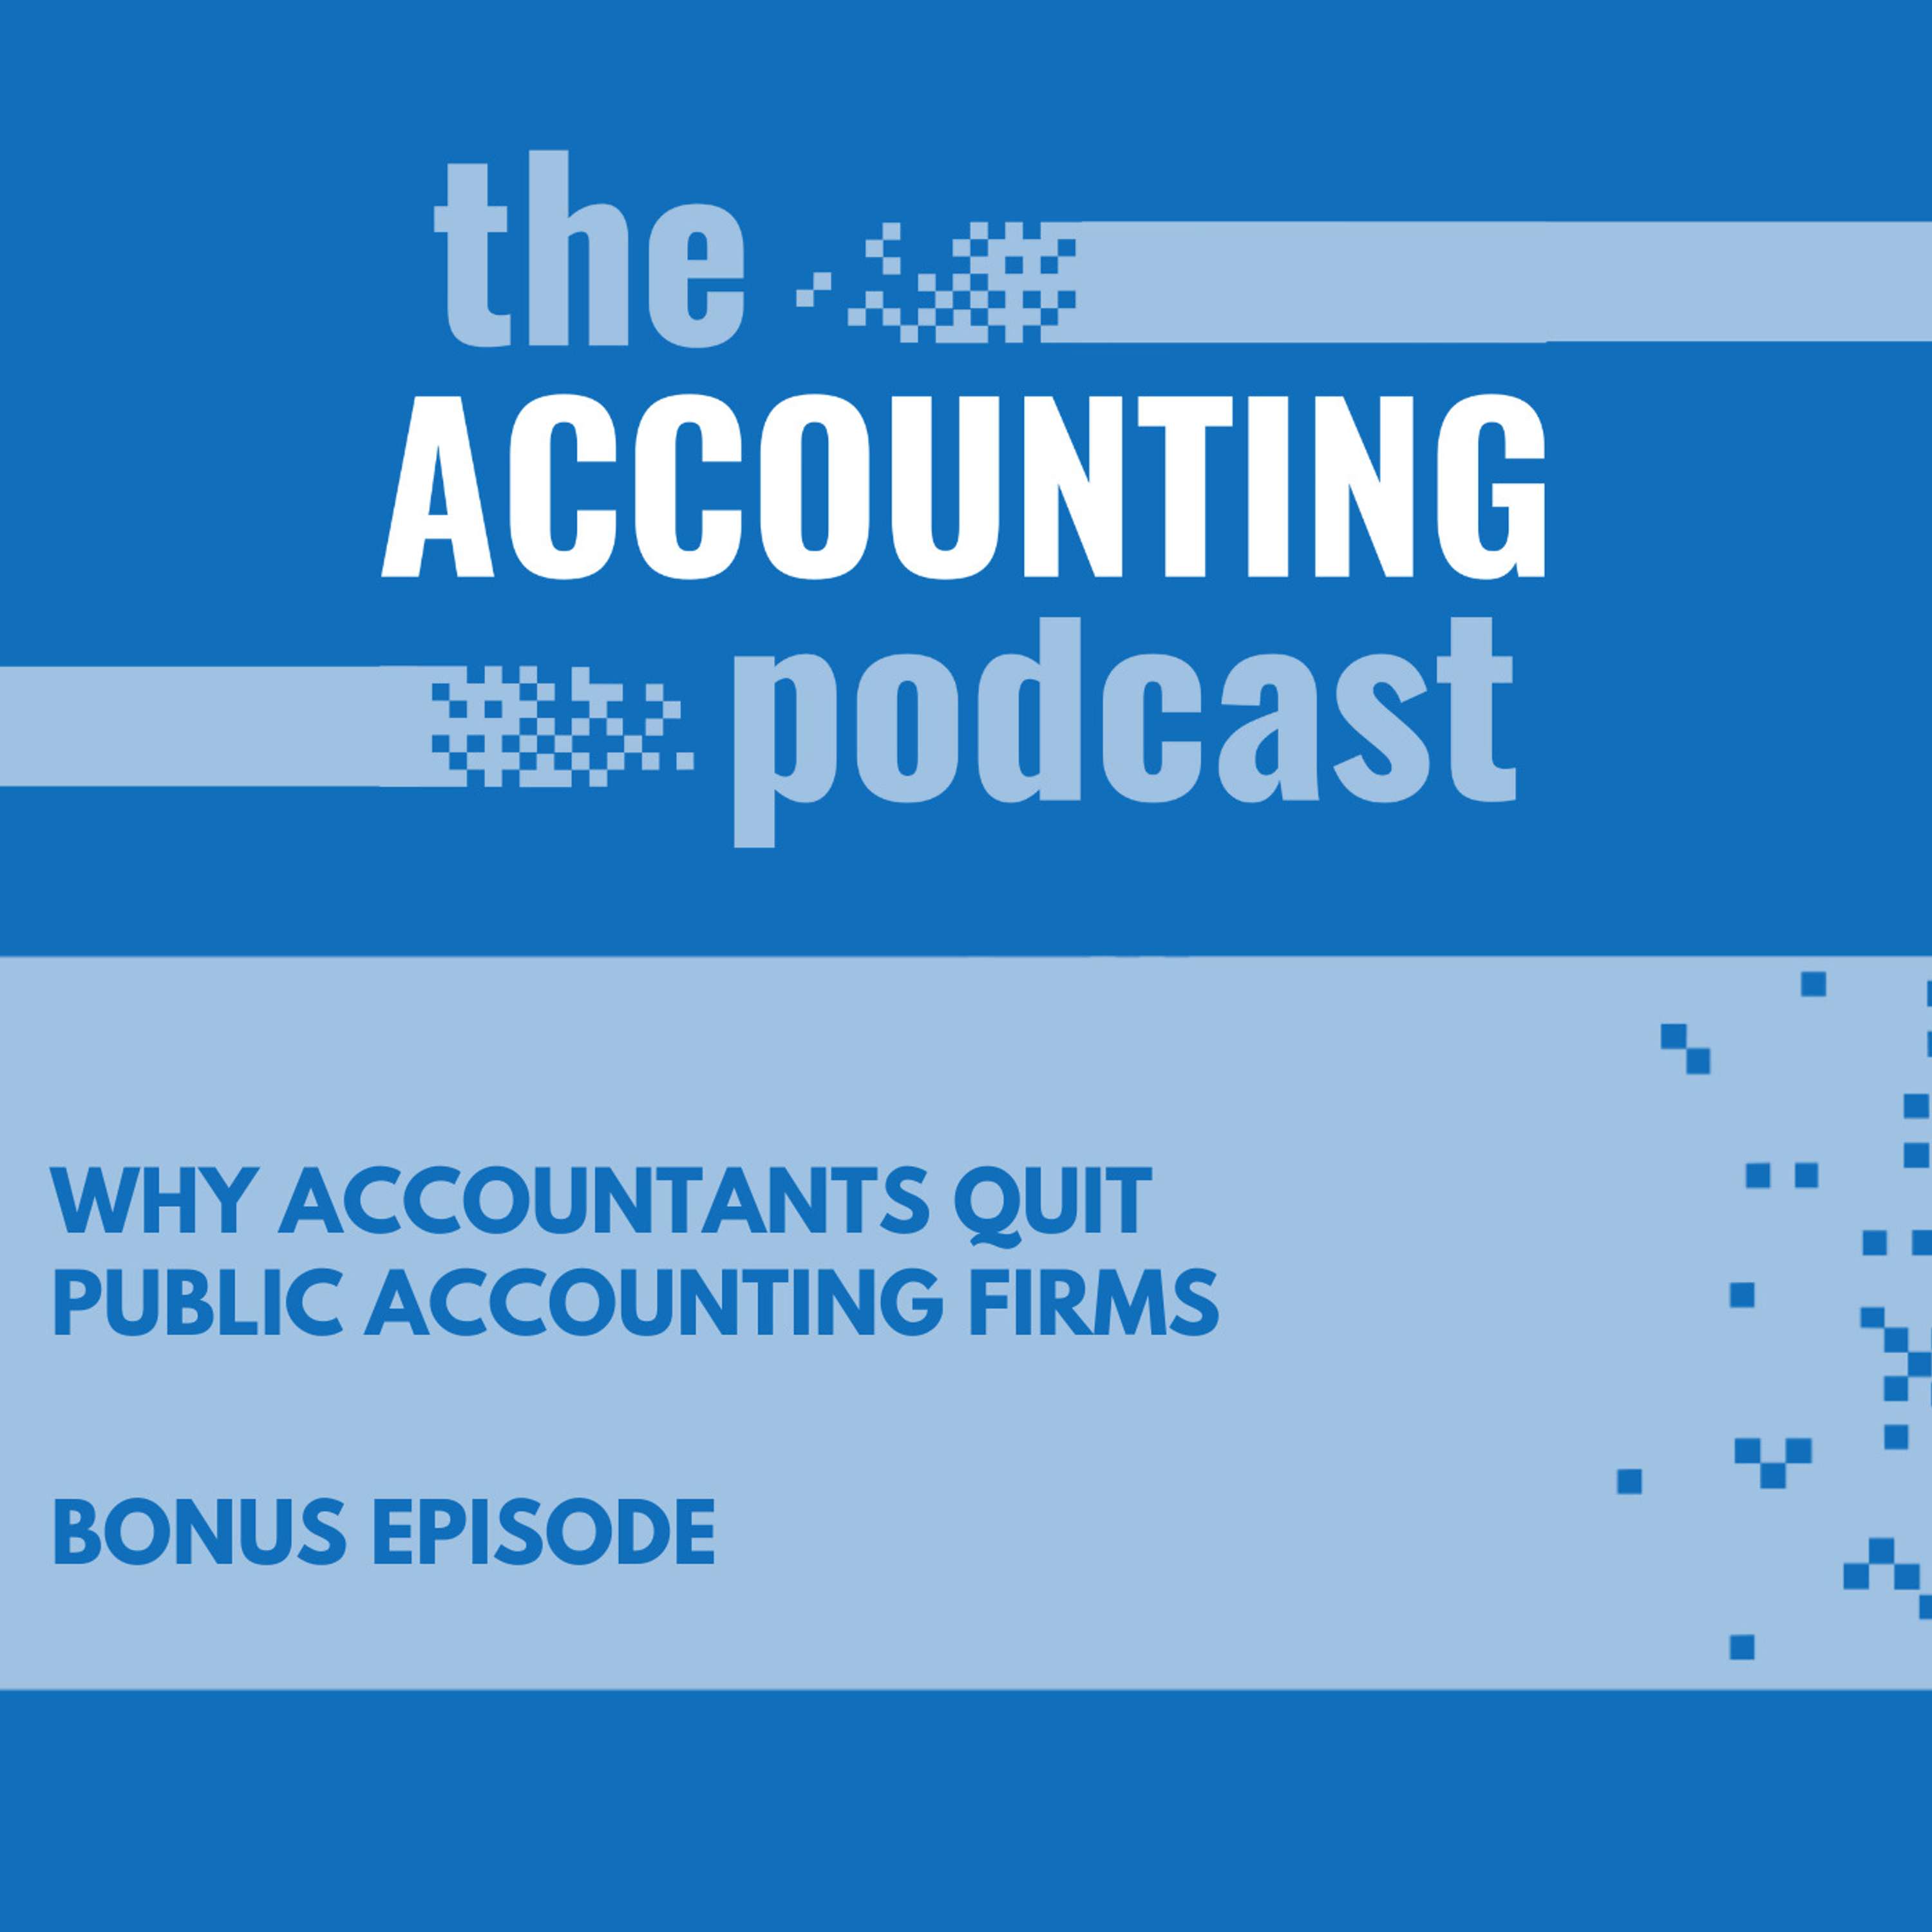 Why Accountants Quit Public Accounting Firms